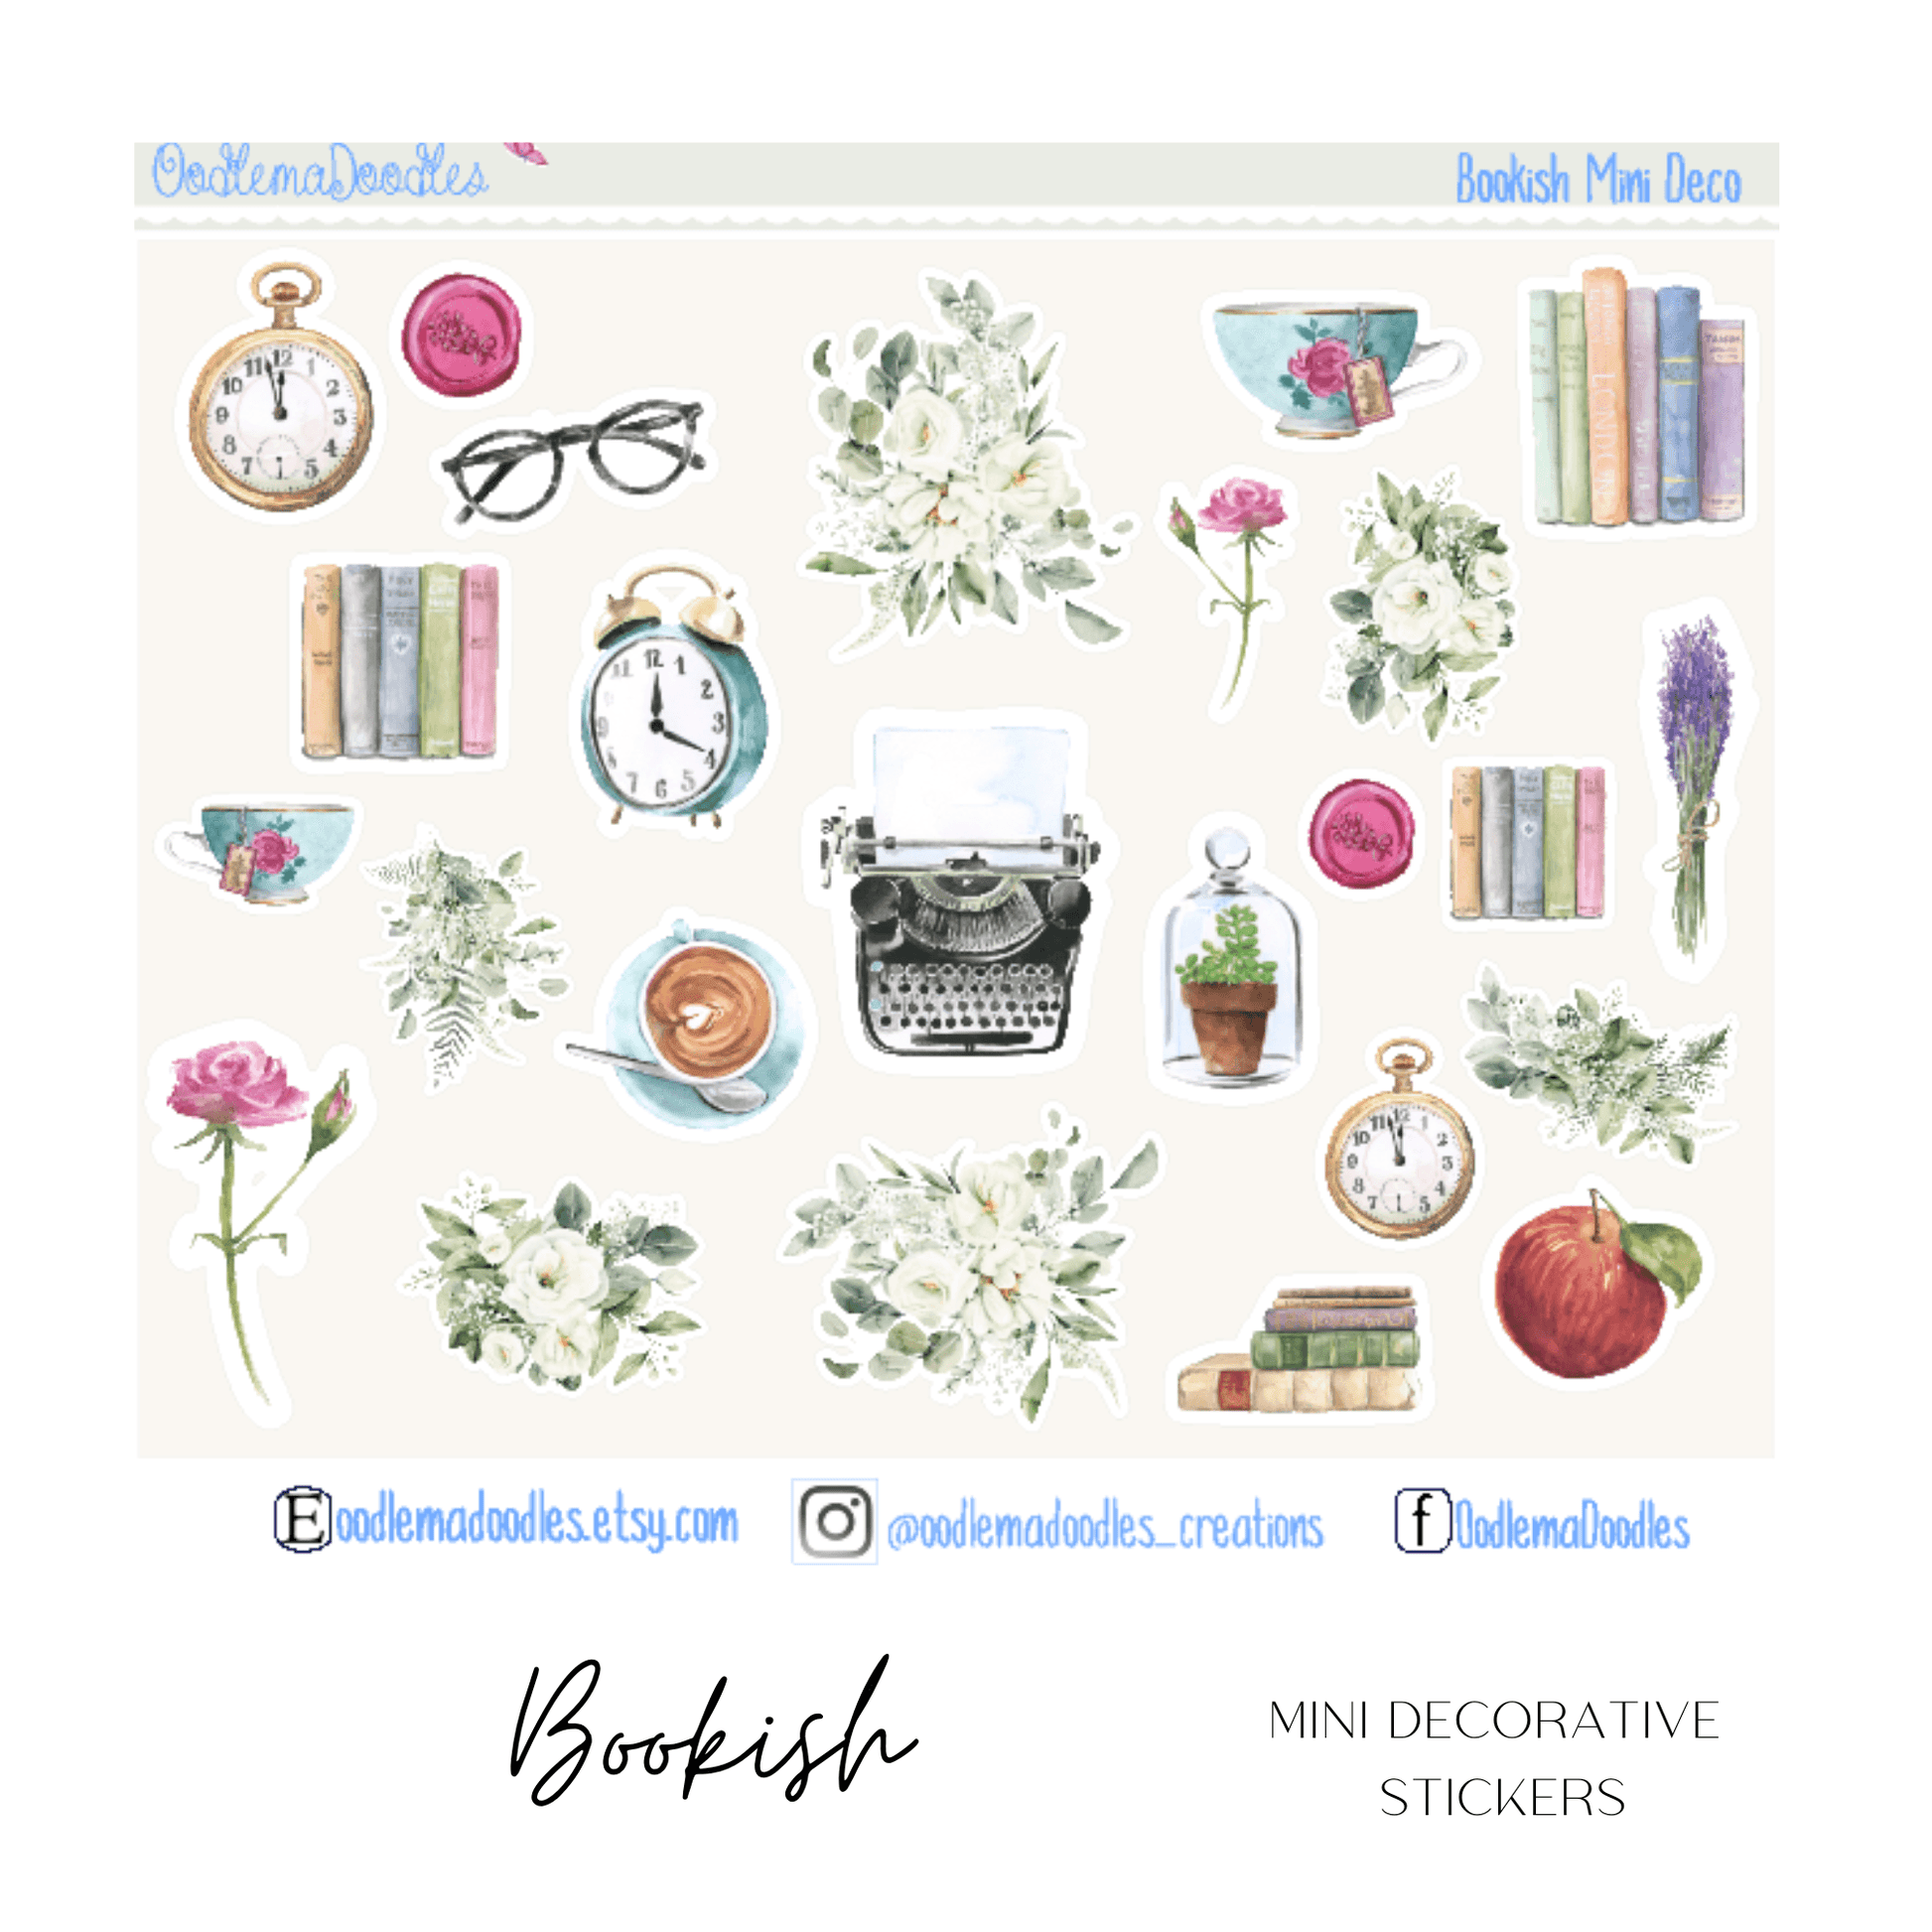 Bookish Mini Decorative Stickers - oodlemadoodles